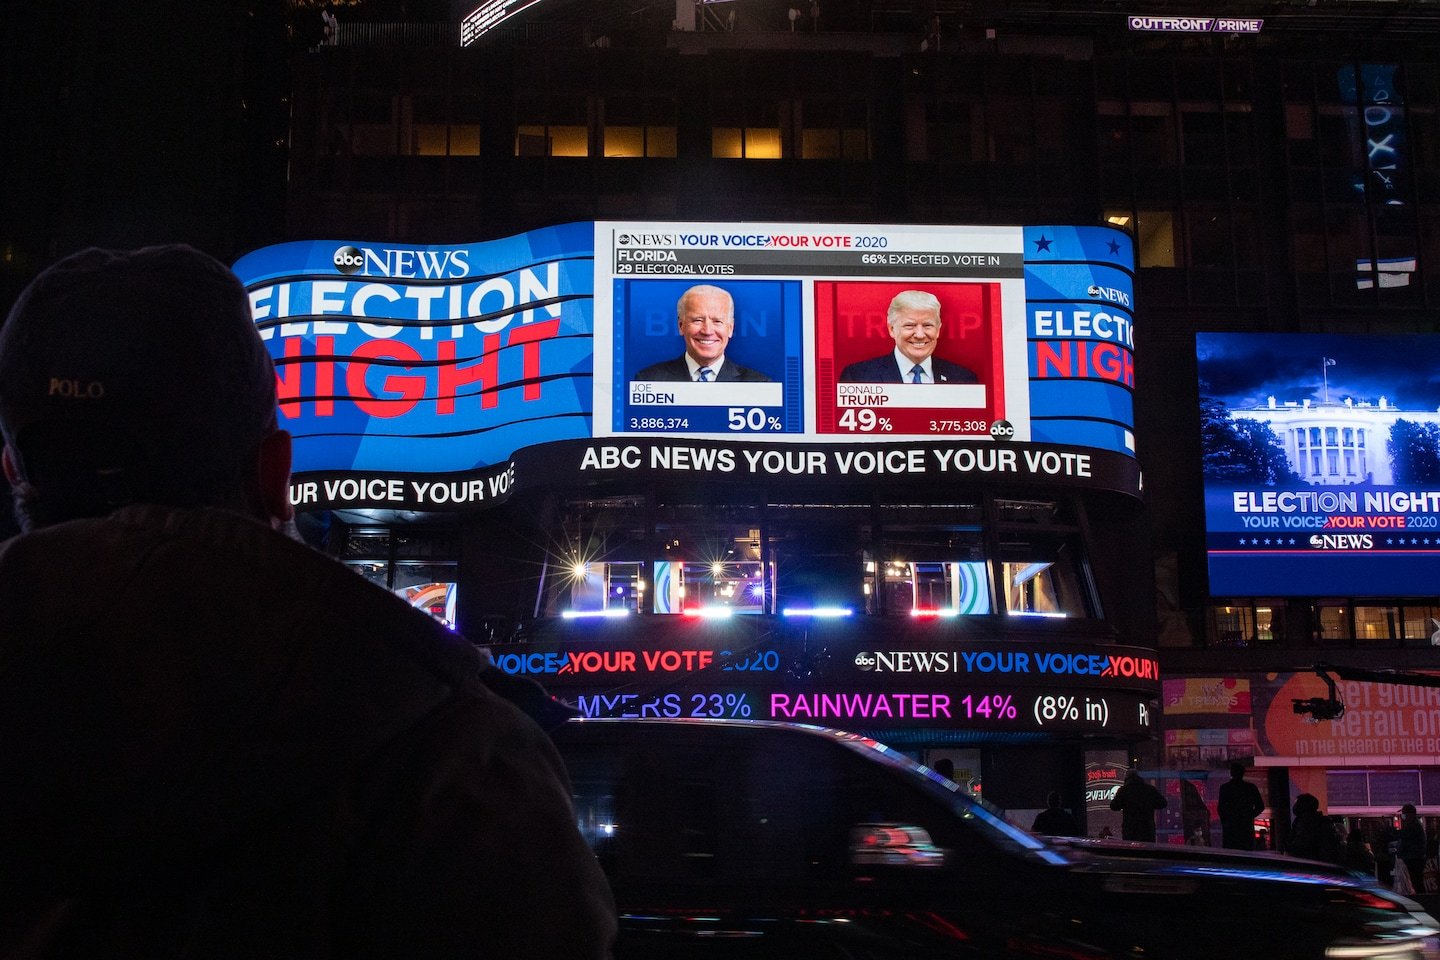 Biden’s victory seemed clear for more than a day. So why did the media hold off on calling it?